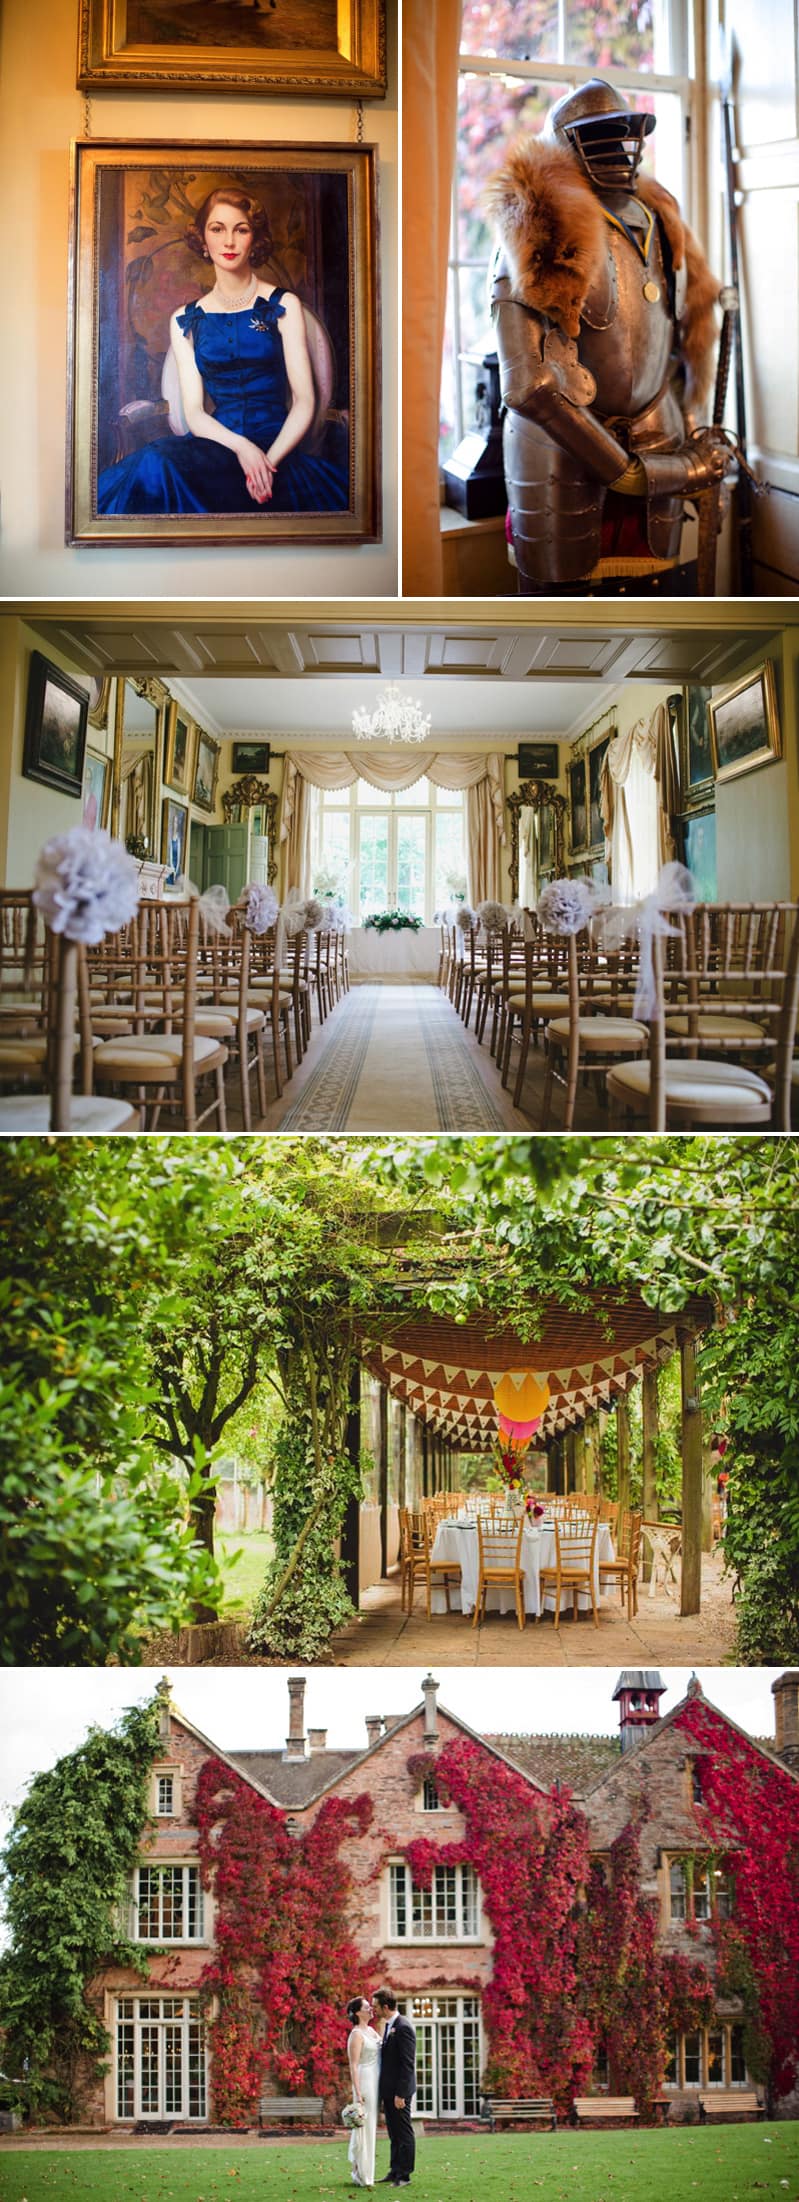 Coco Wedding Venues in Somerset - Maunsel House.